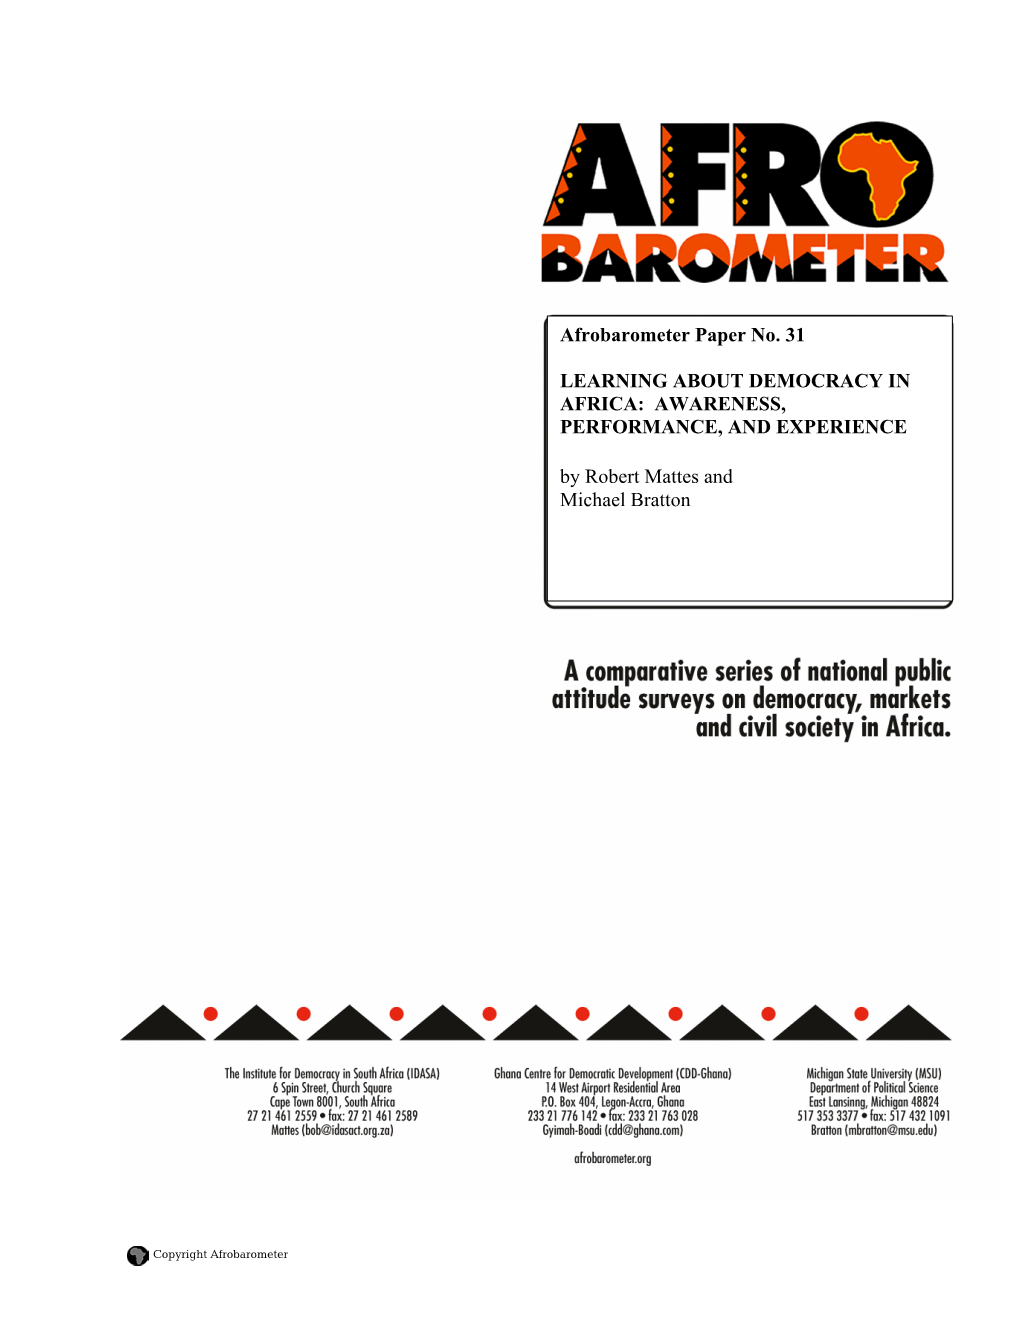 Afrobarometer Paper No. 31 LEARNING ABOUT DEMOCRACY in AFRICA: AWARENESS, PERFORMANCE, and EXPERIENCE by Robert Mattes And